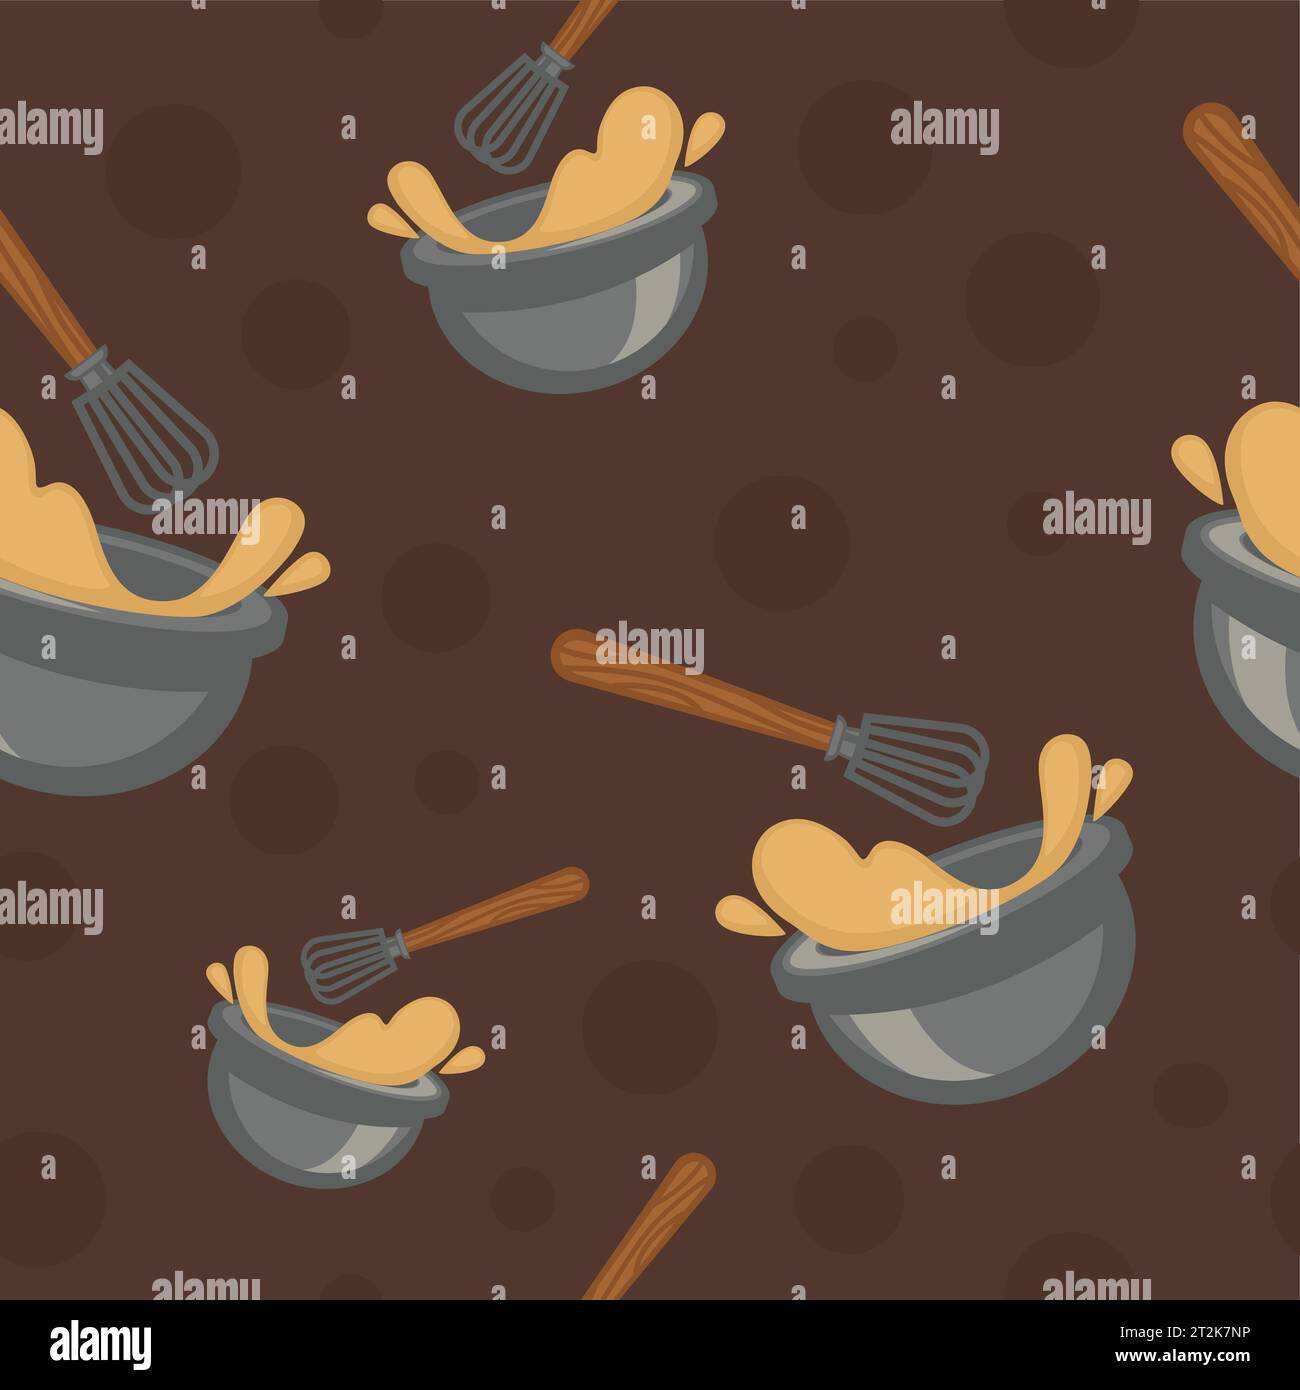 Dough preparation mixing ingredients in bowl Vector Image